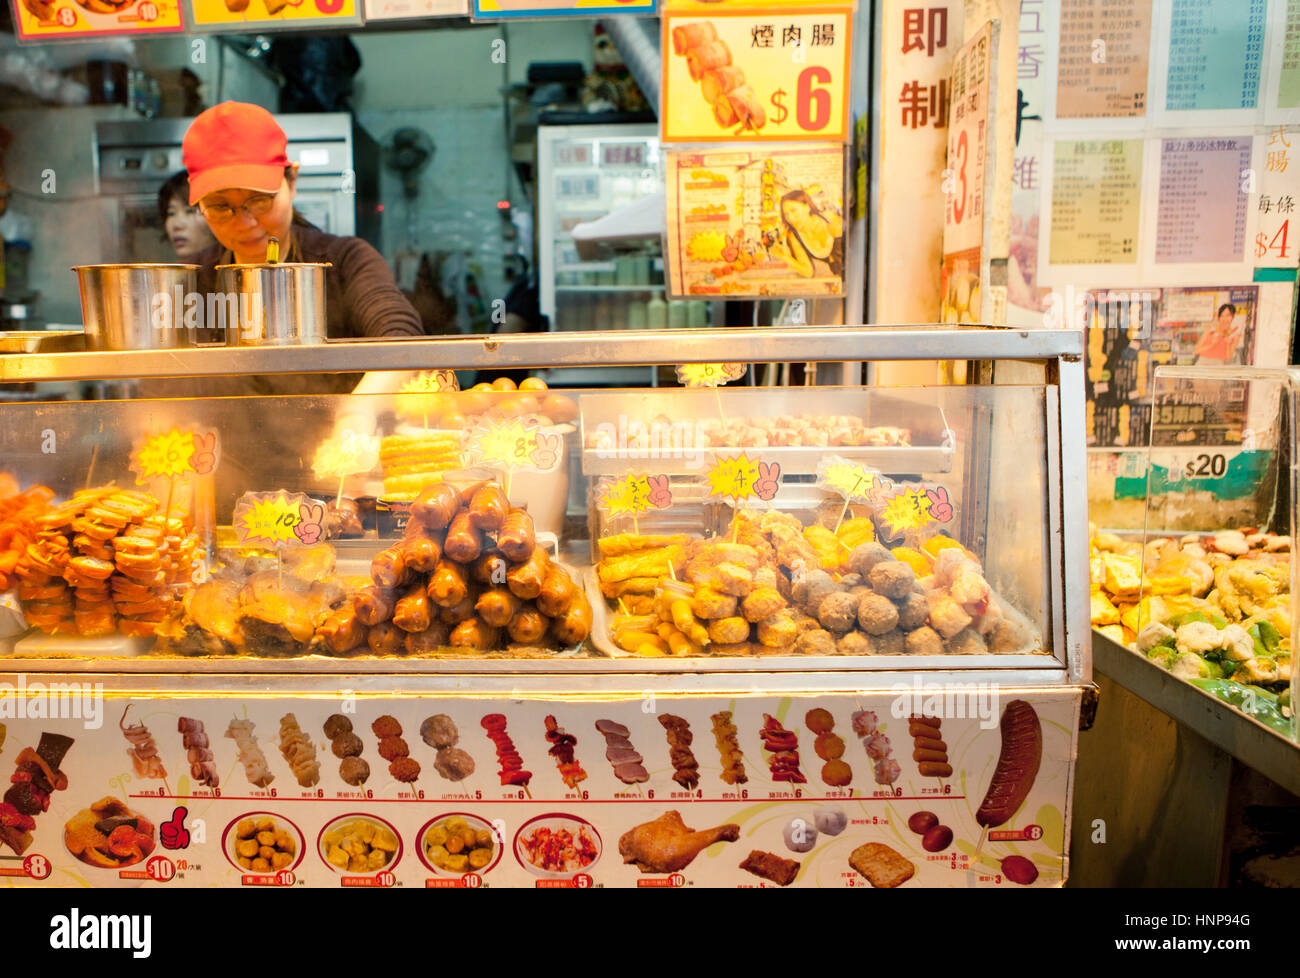 Food vendor on the street of Kowloon, Hong Kong on March 13, 2012. Stock Photo